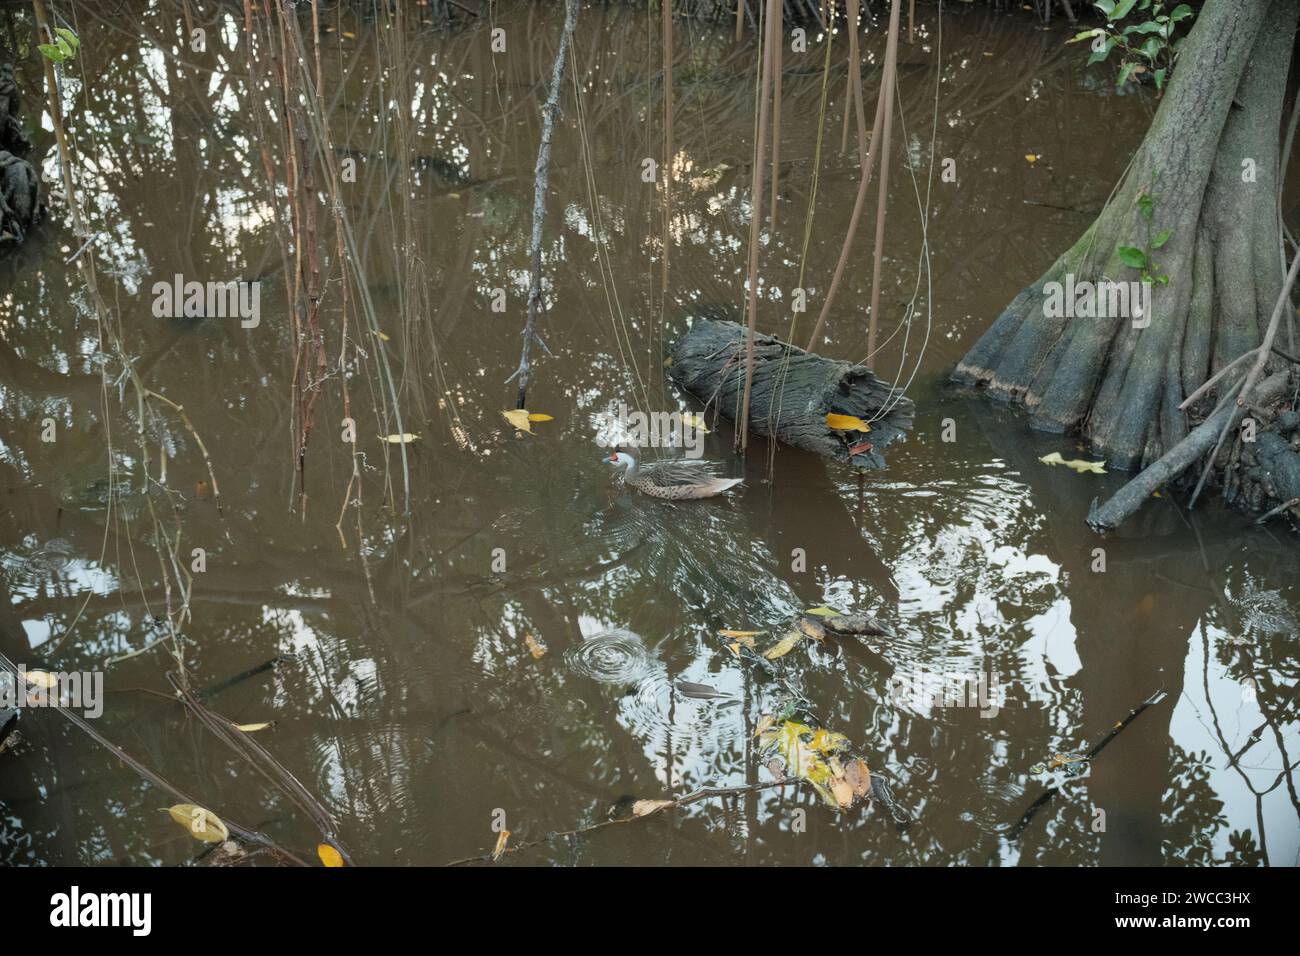 Swimming duck in a swamp Stock Photo